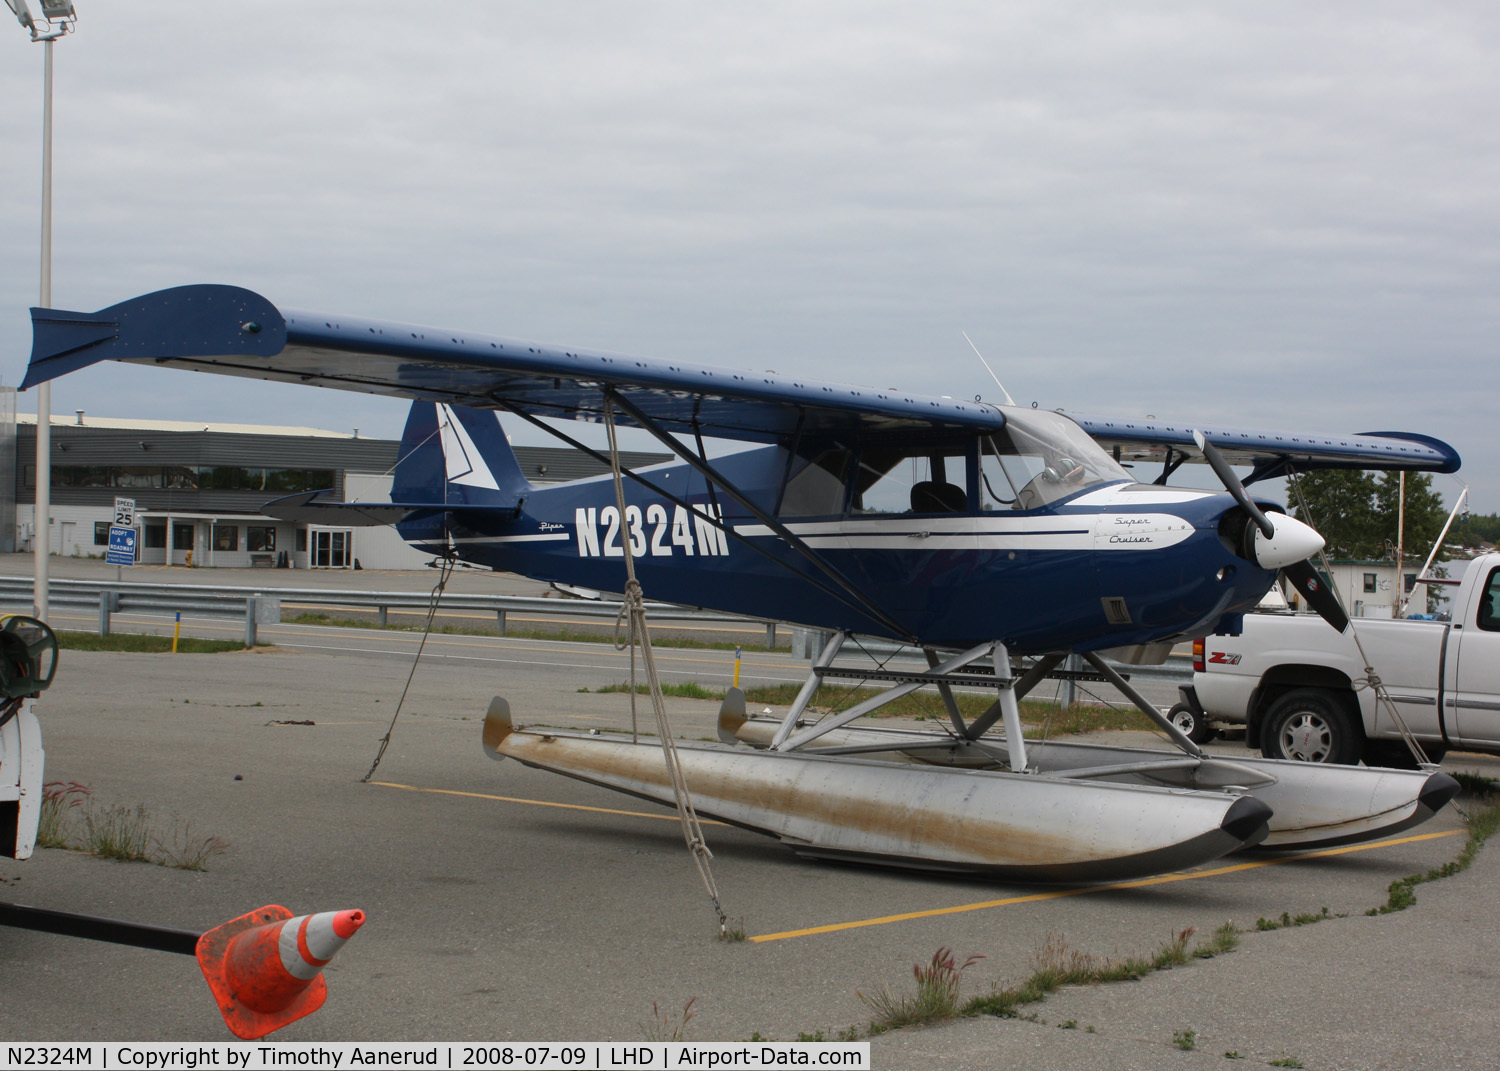 N2324M, 1946 Piper PA-12 Super Cruiser C/N 12-1488, General Aviation parking area at Anchorage